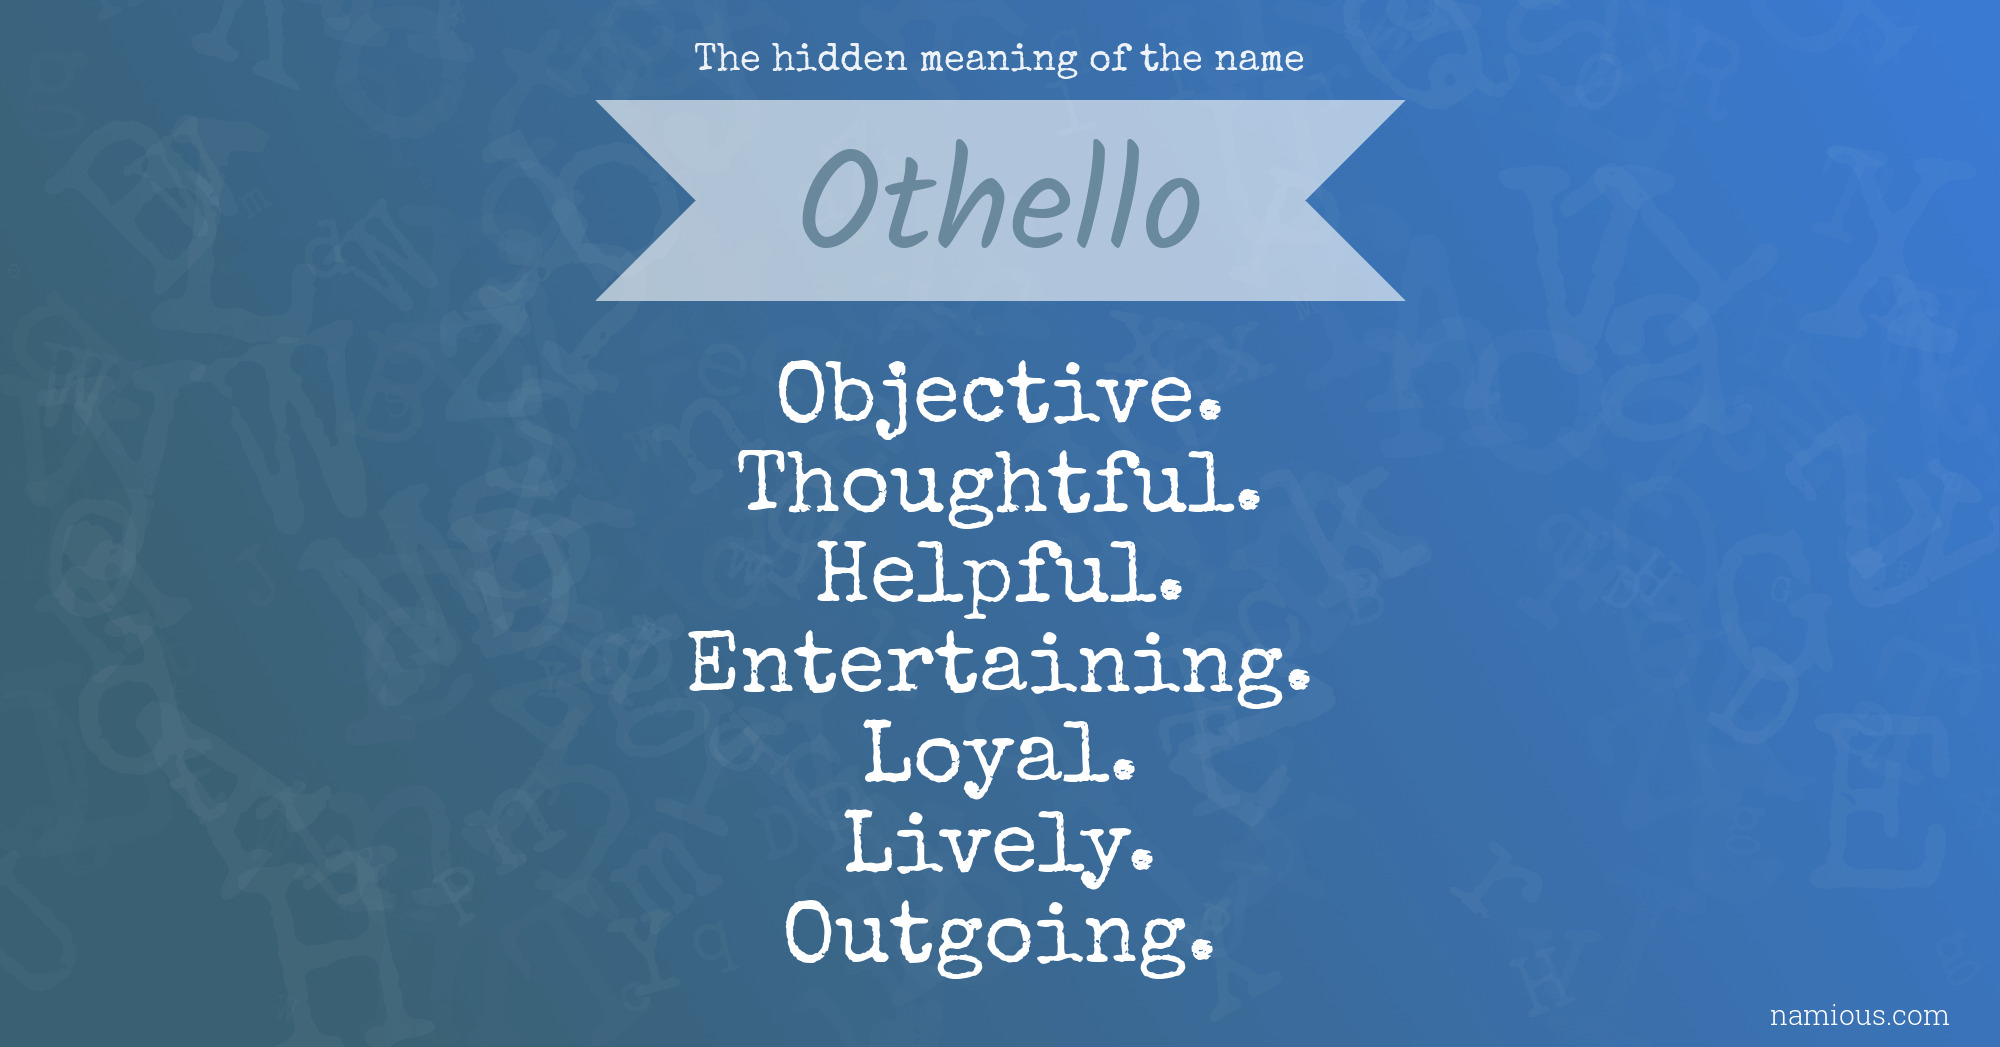 The hidden meaning of the name Othello